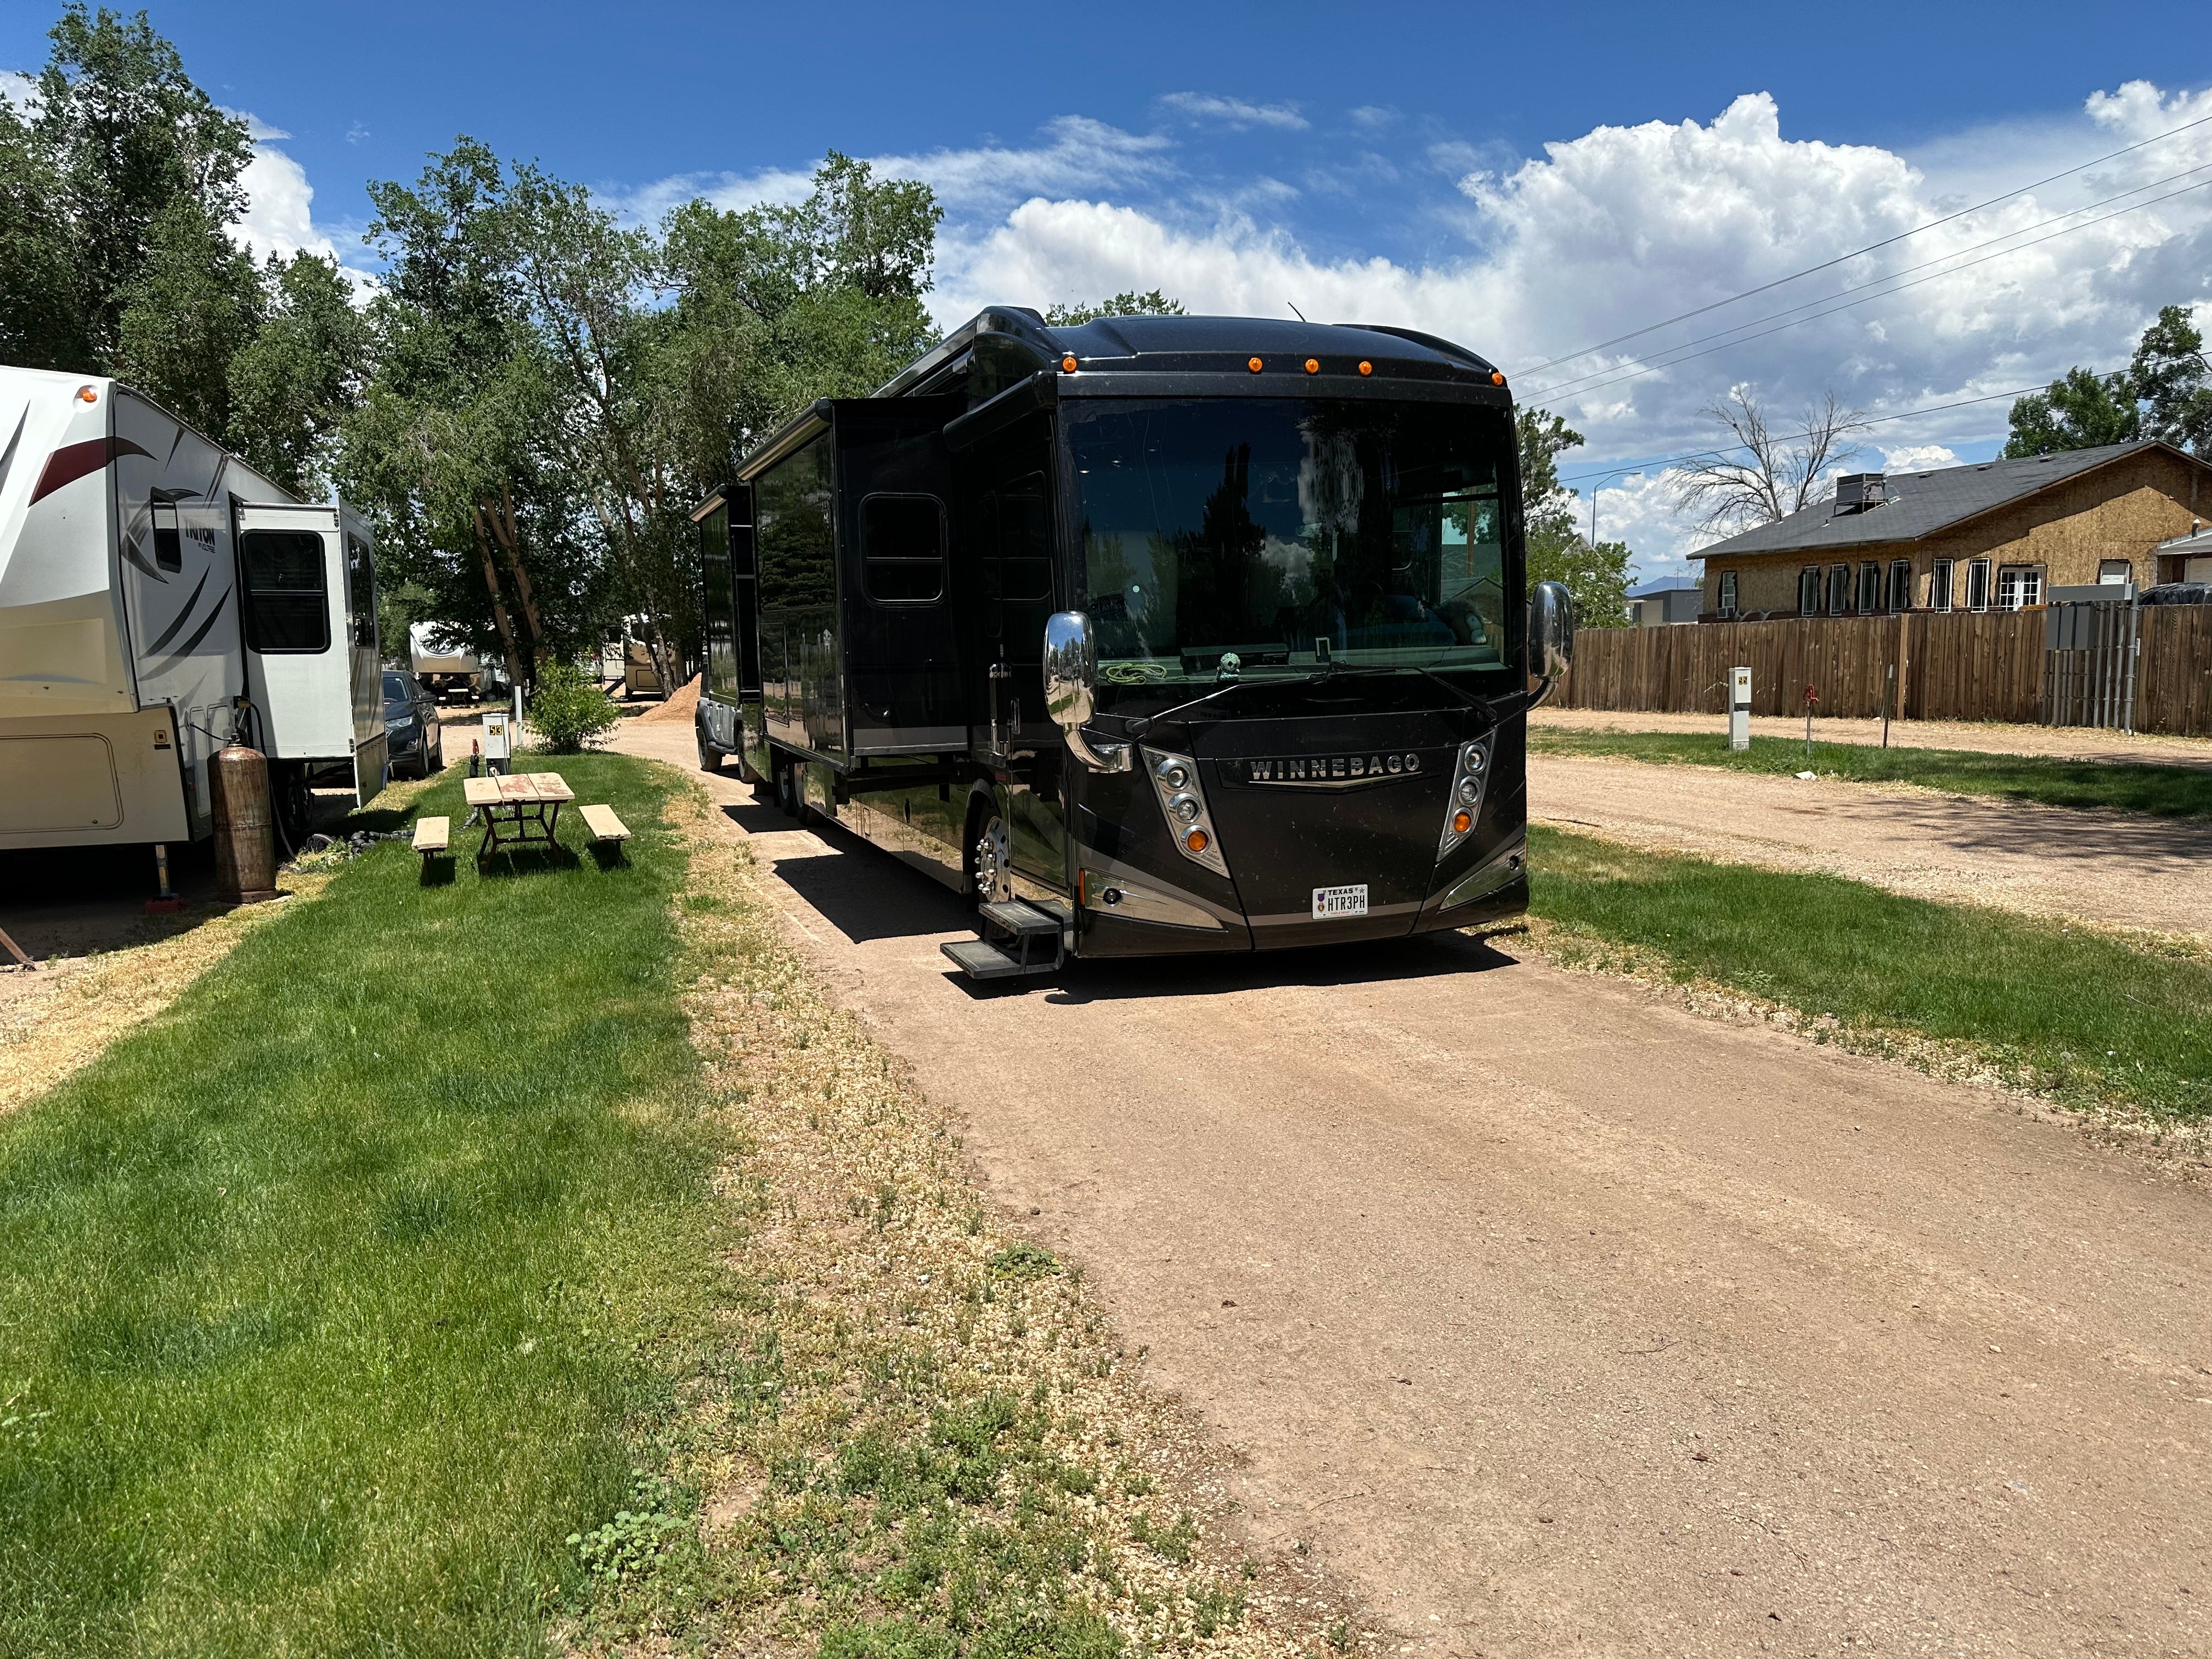 Camper submitted image from Wagons West RV Campground - 4